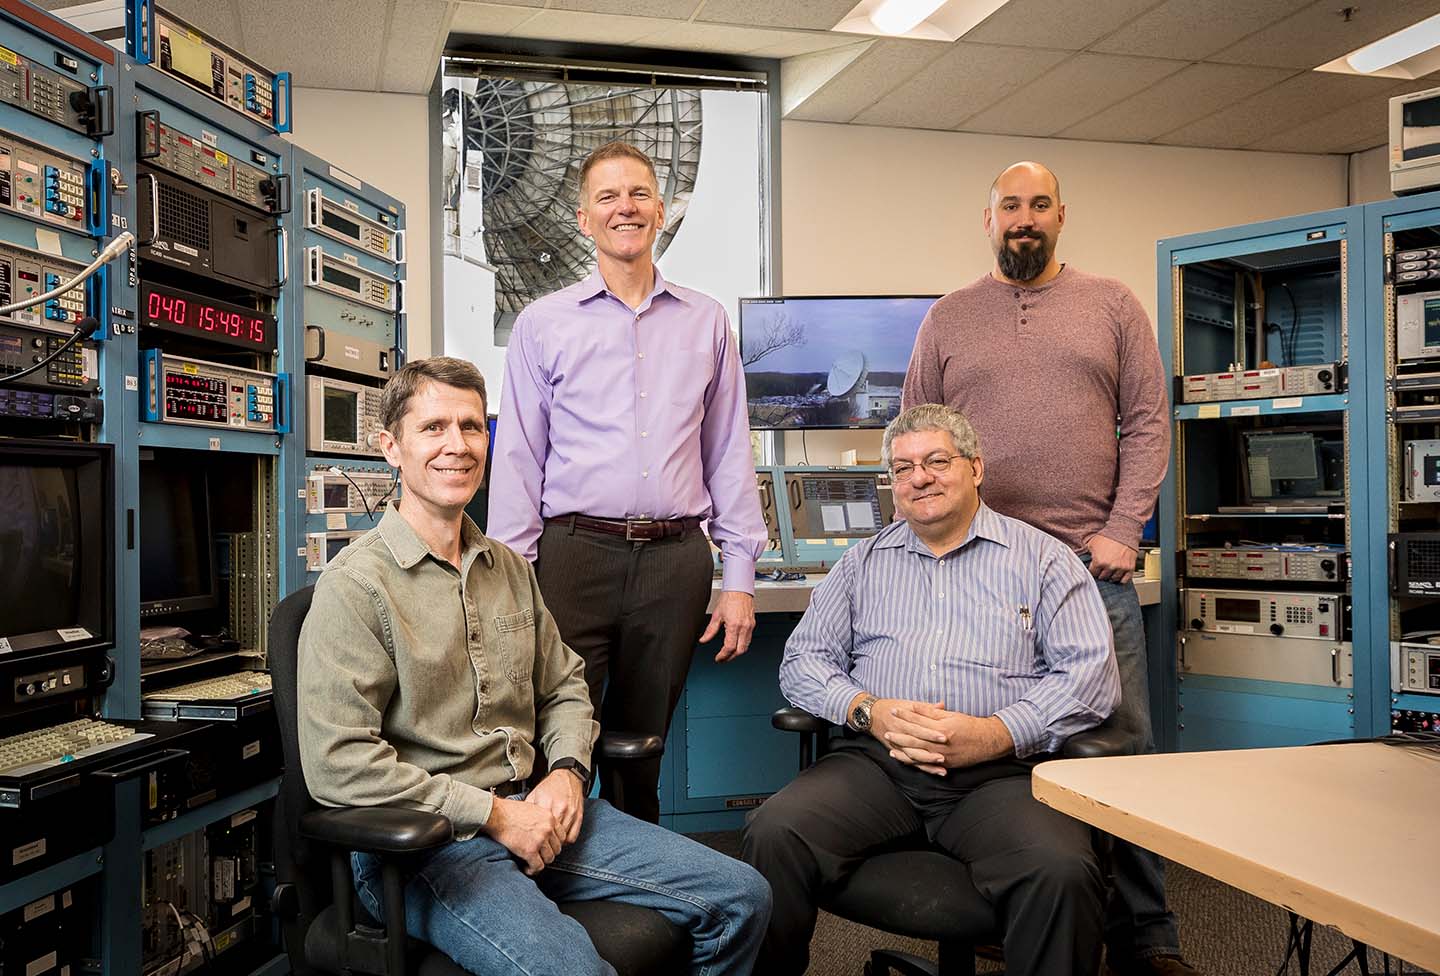 The APL Satellite Communications Facility team